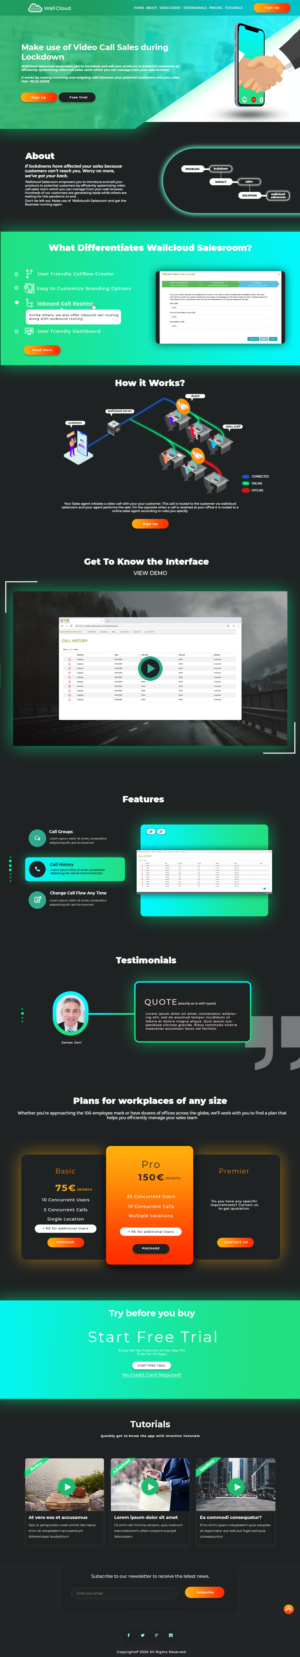 Landing Page for new Software as a Service Product | Landing Page Design by Web Dev